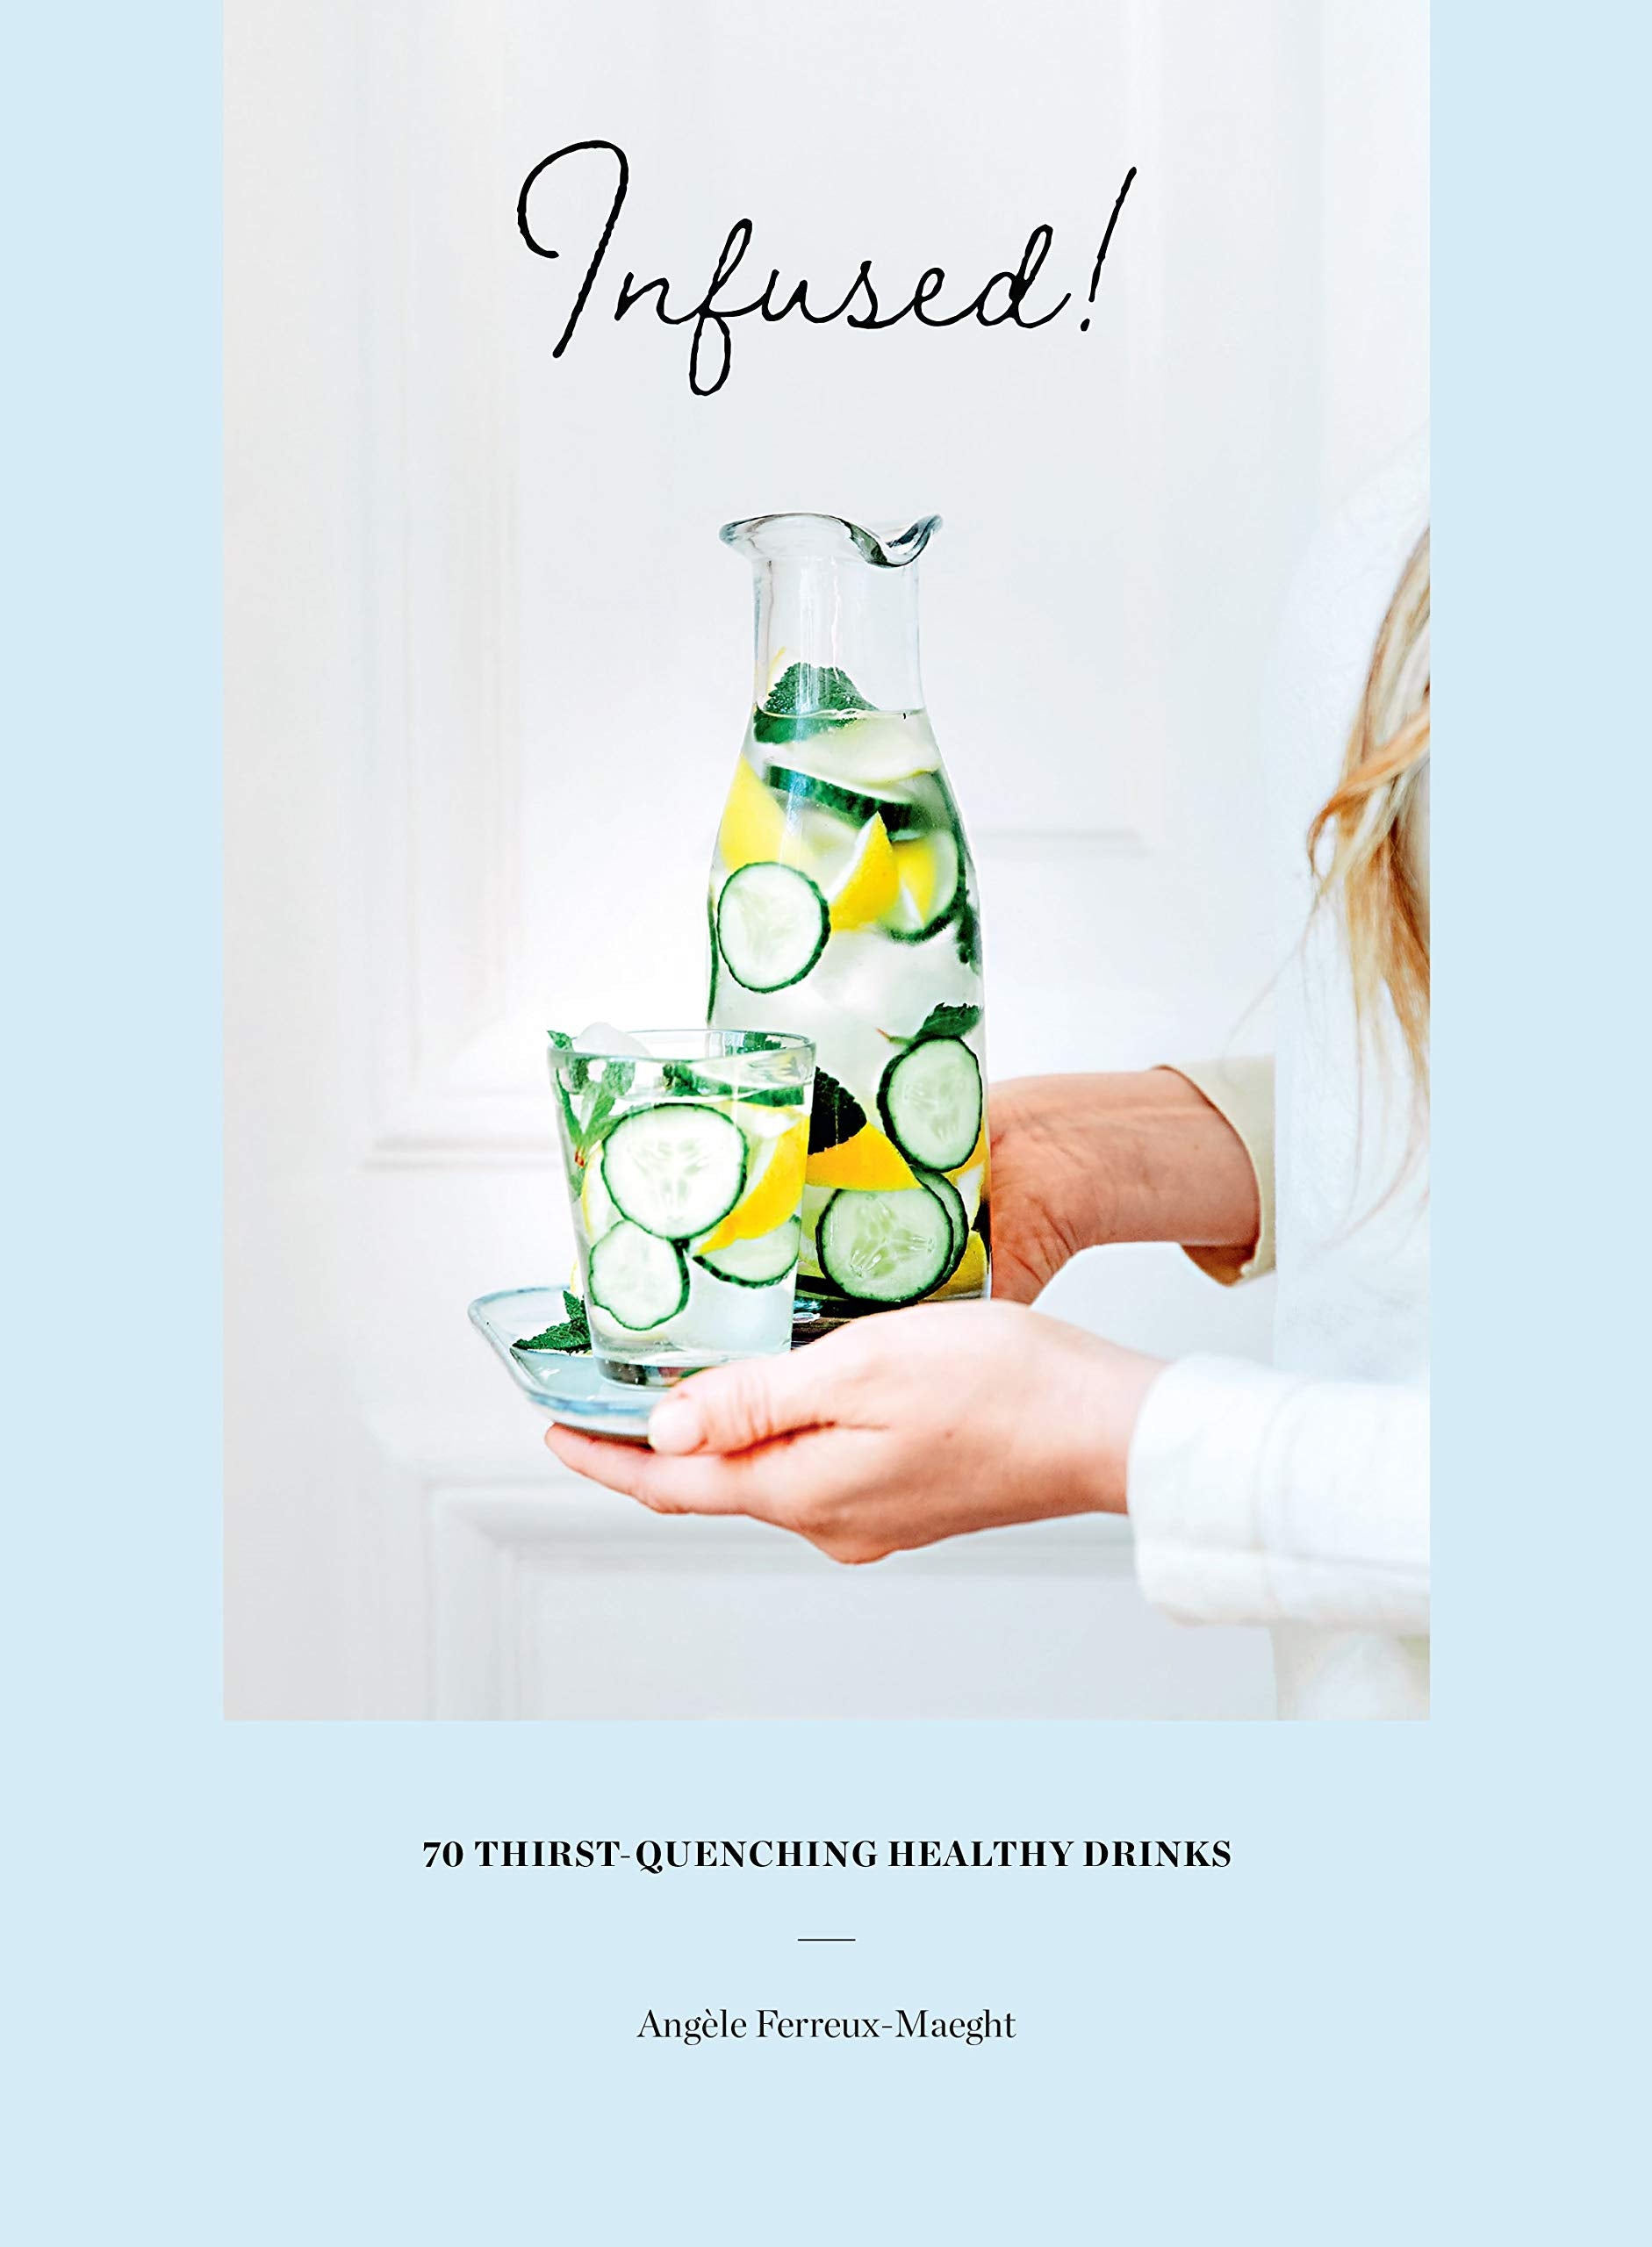 Infused!: 70 Thirst-Quenching Healthy Drinks (Angèle Ferreux-Maeght)